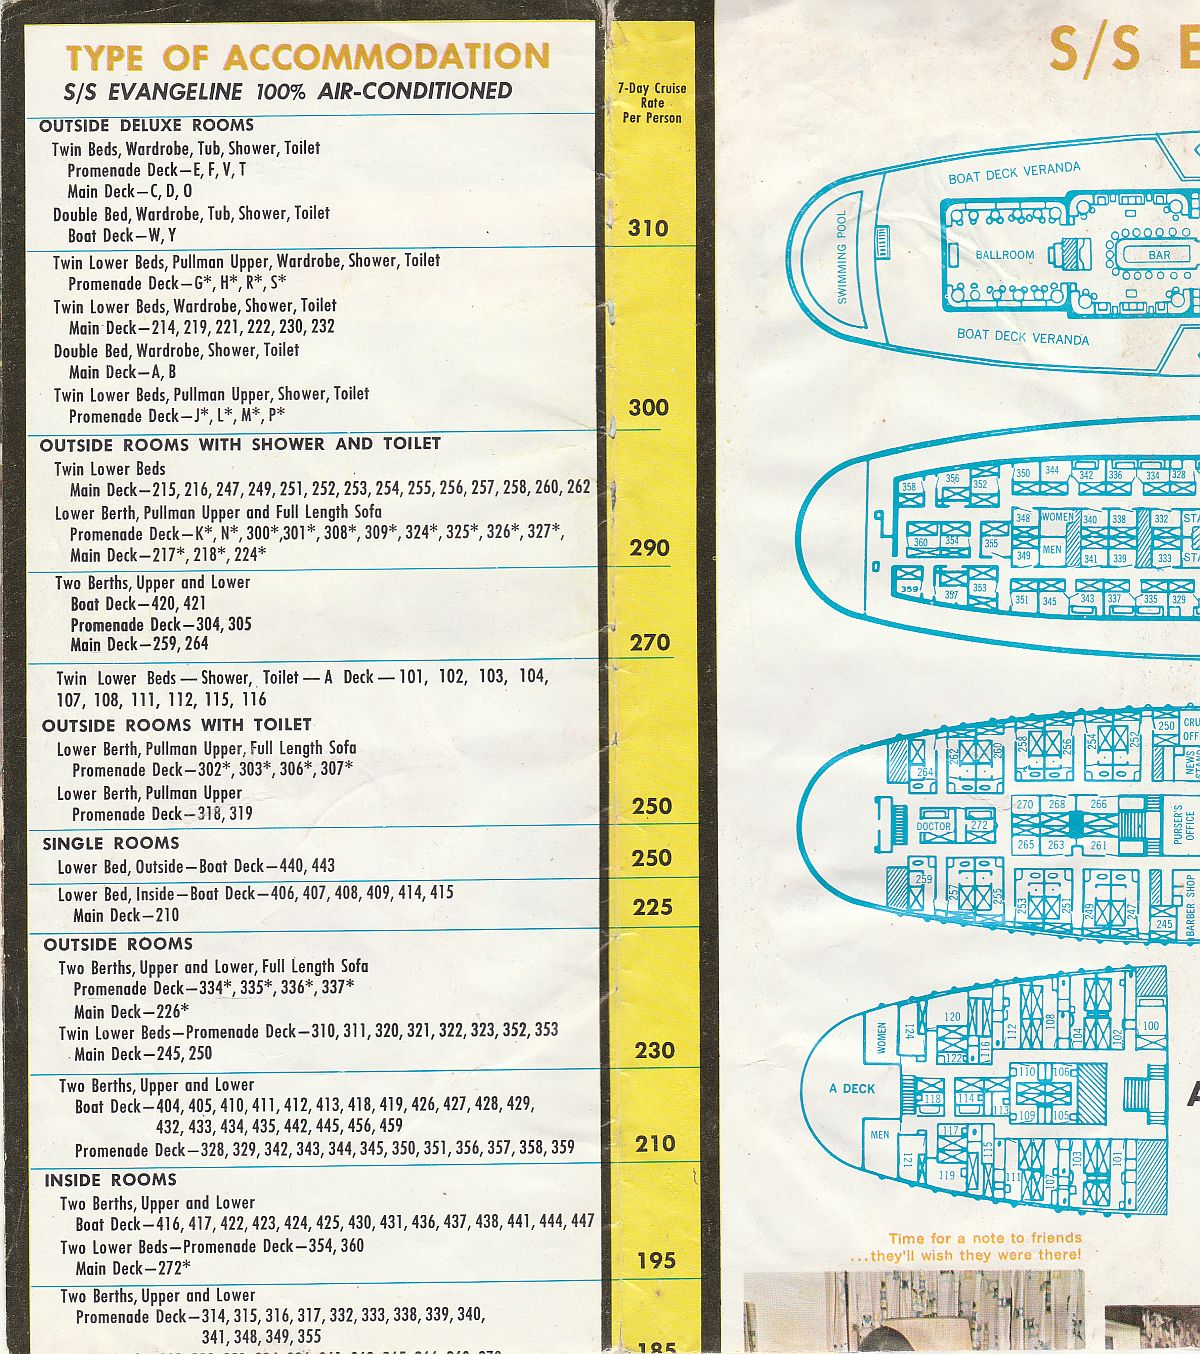 ss Evangeline Fares and deck plans: Type of accommodation 7-day cruise rates